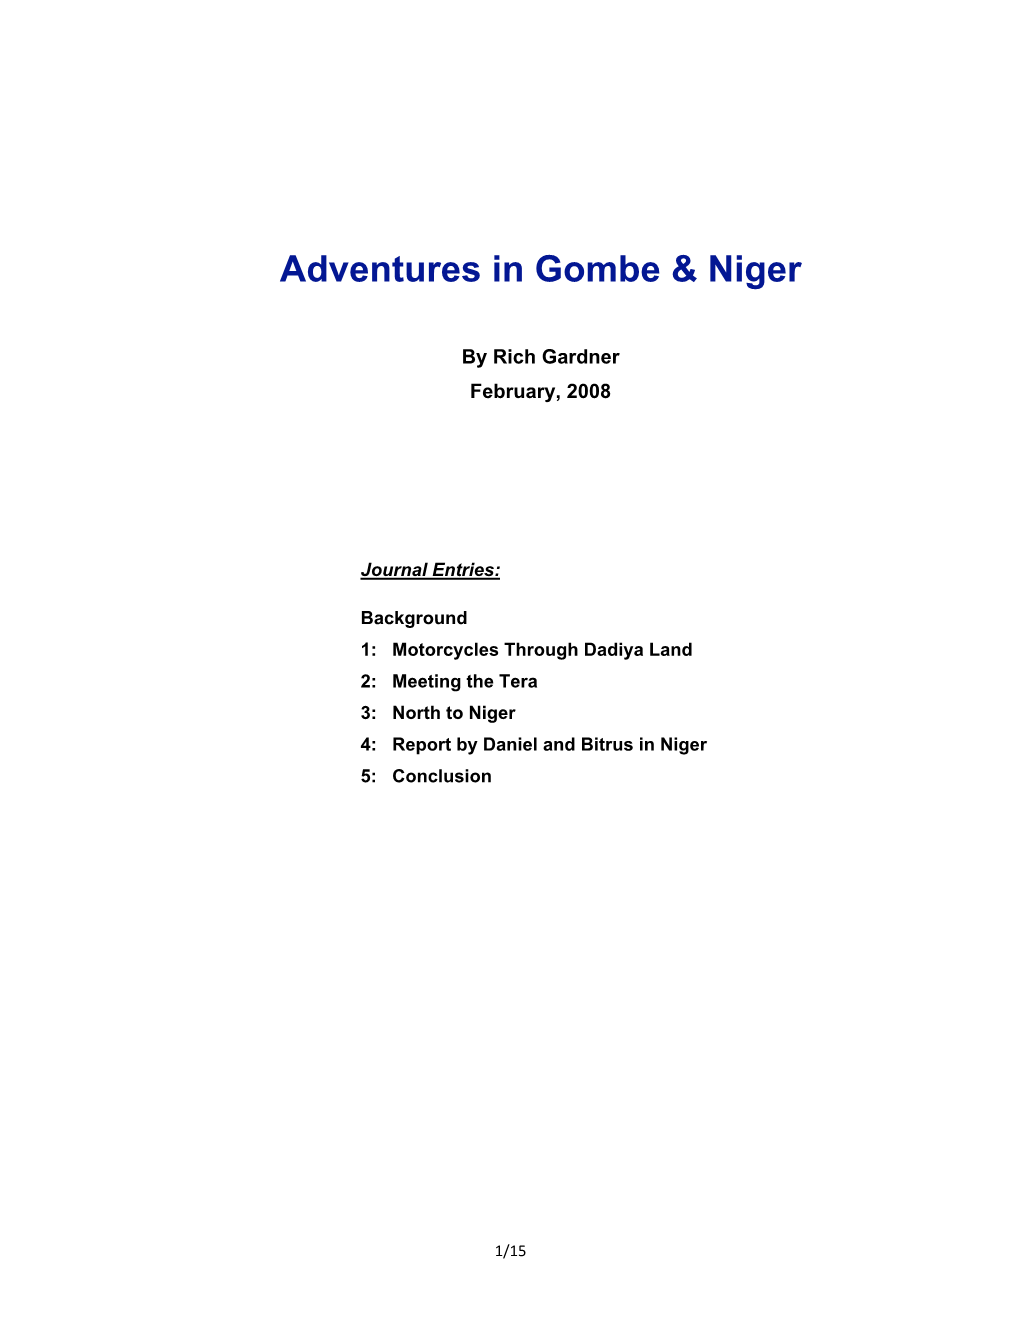 Adventures in Gombe and Niger 2008